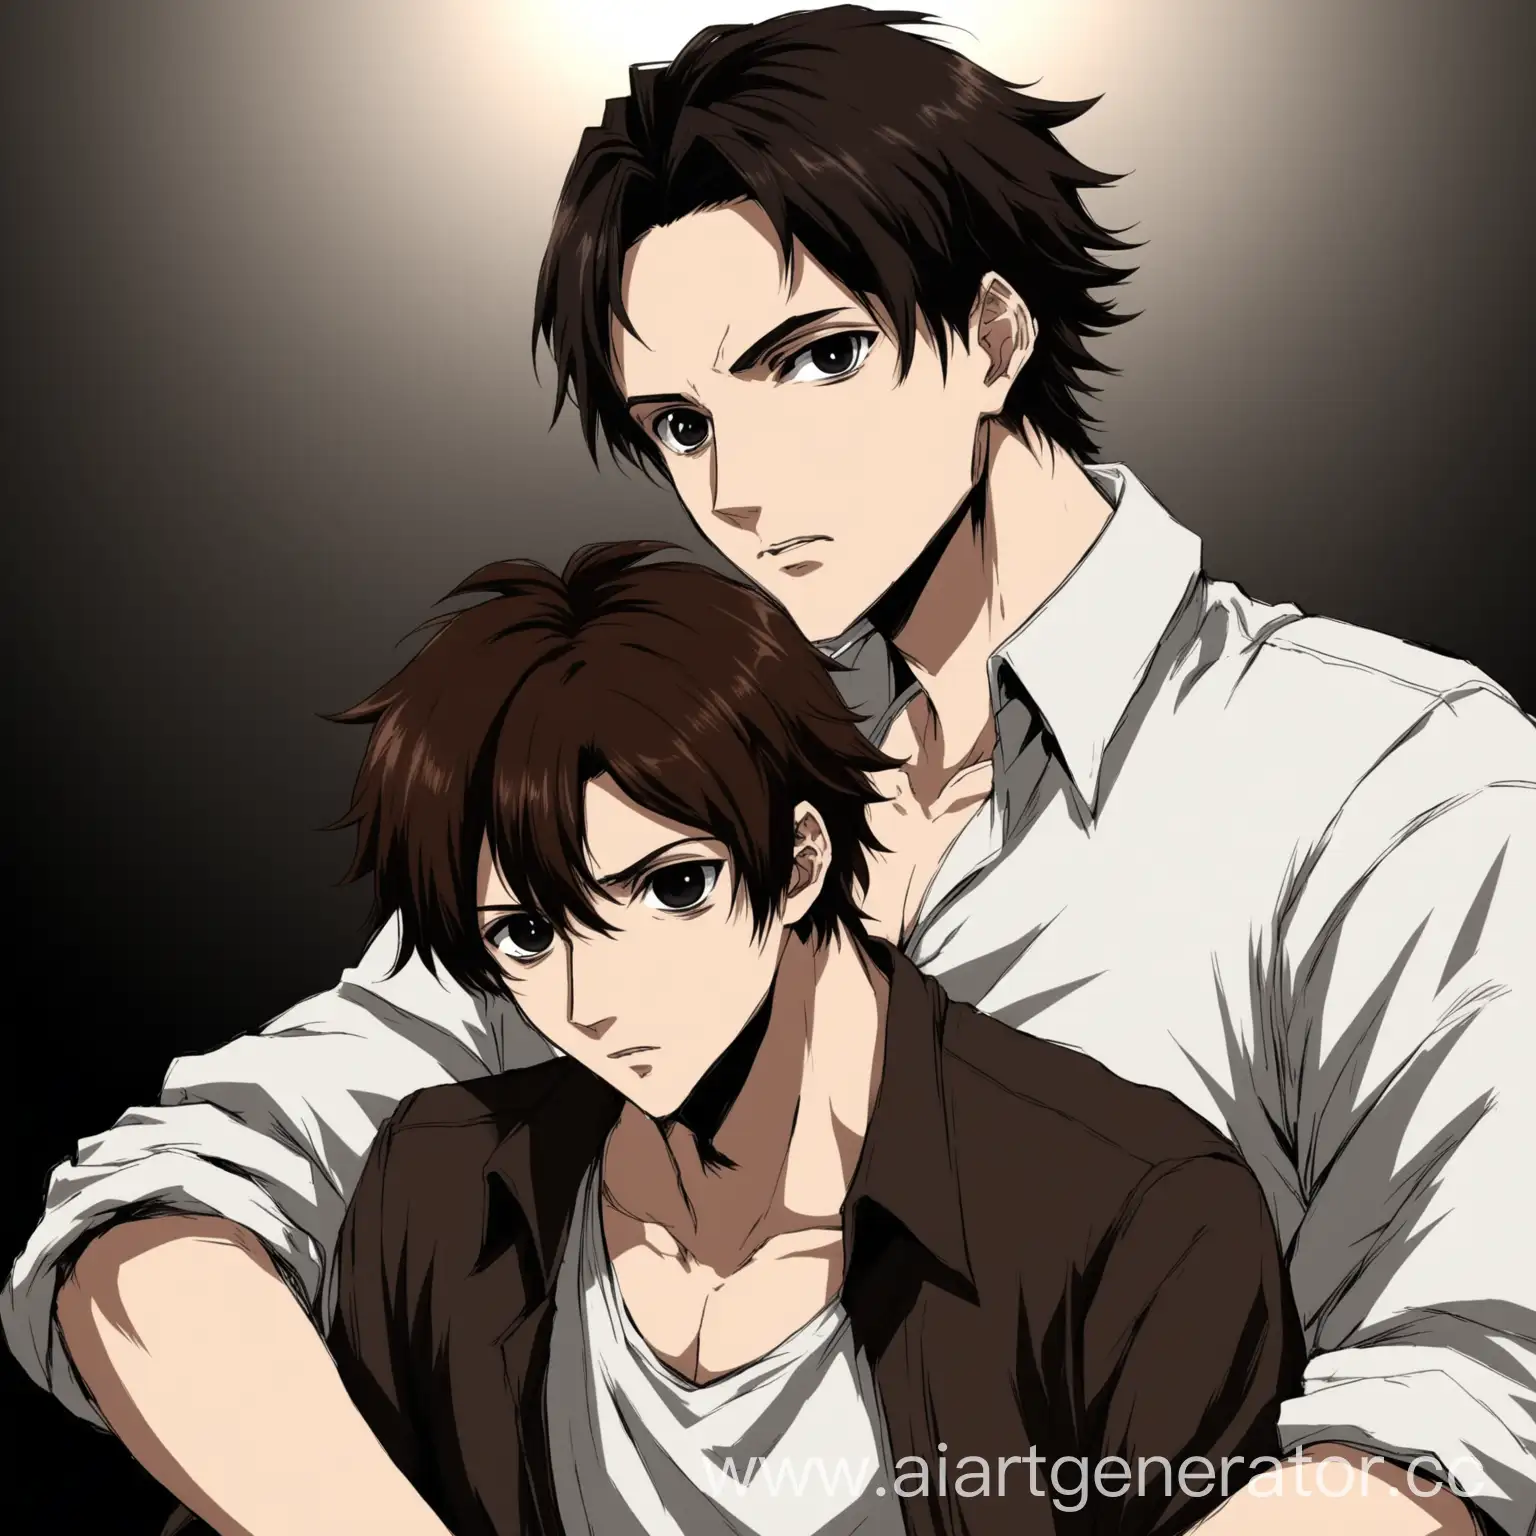 Anime-Style-Brunet-Man-with-White-Shirt-and-Dark-Brown-Hair